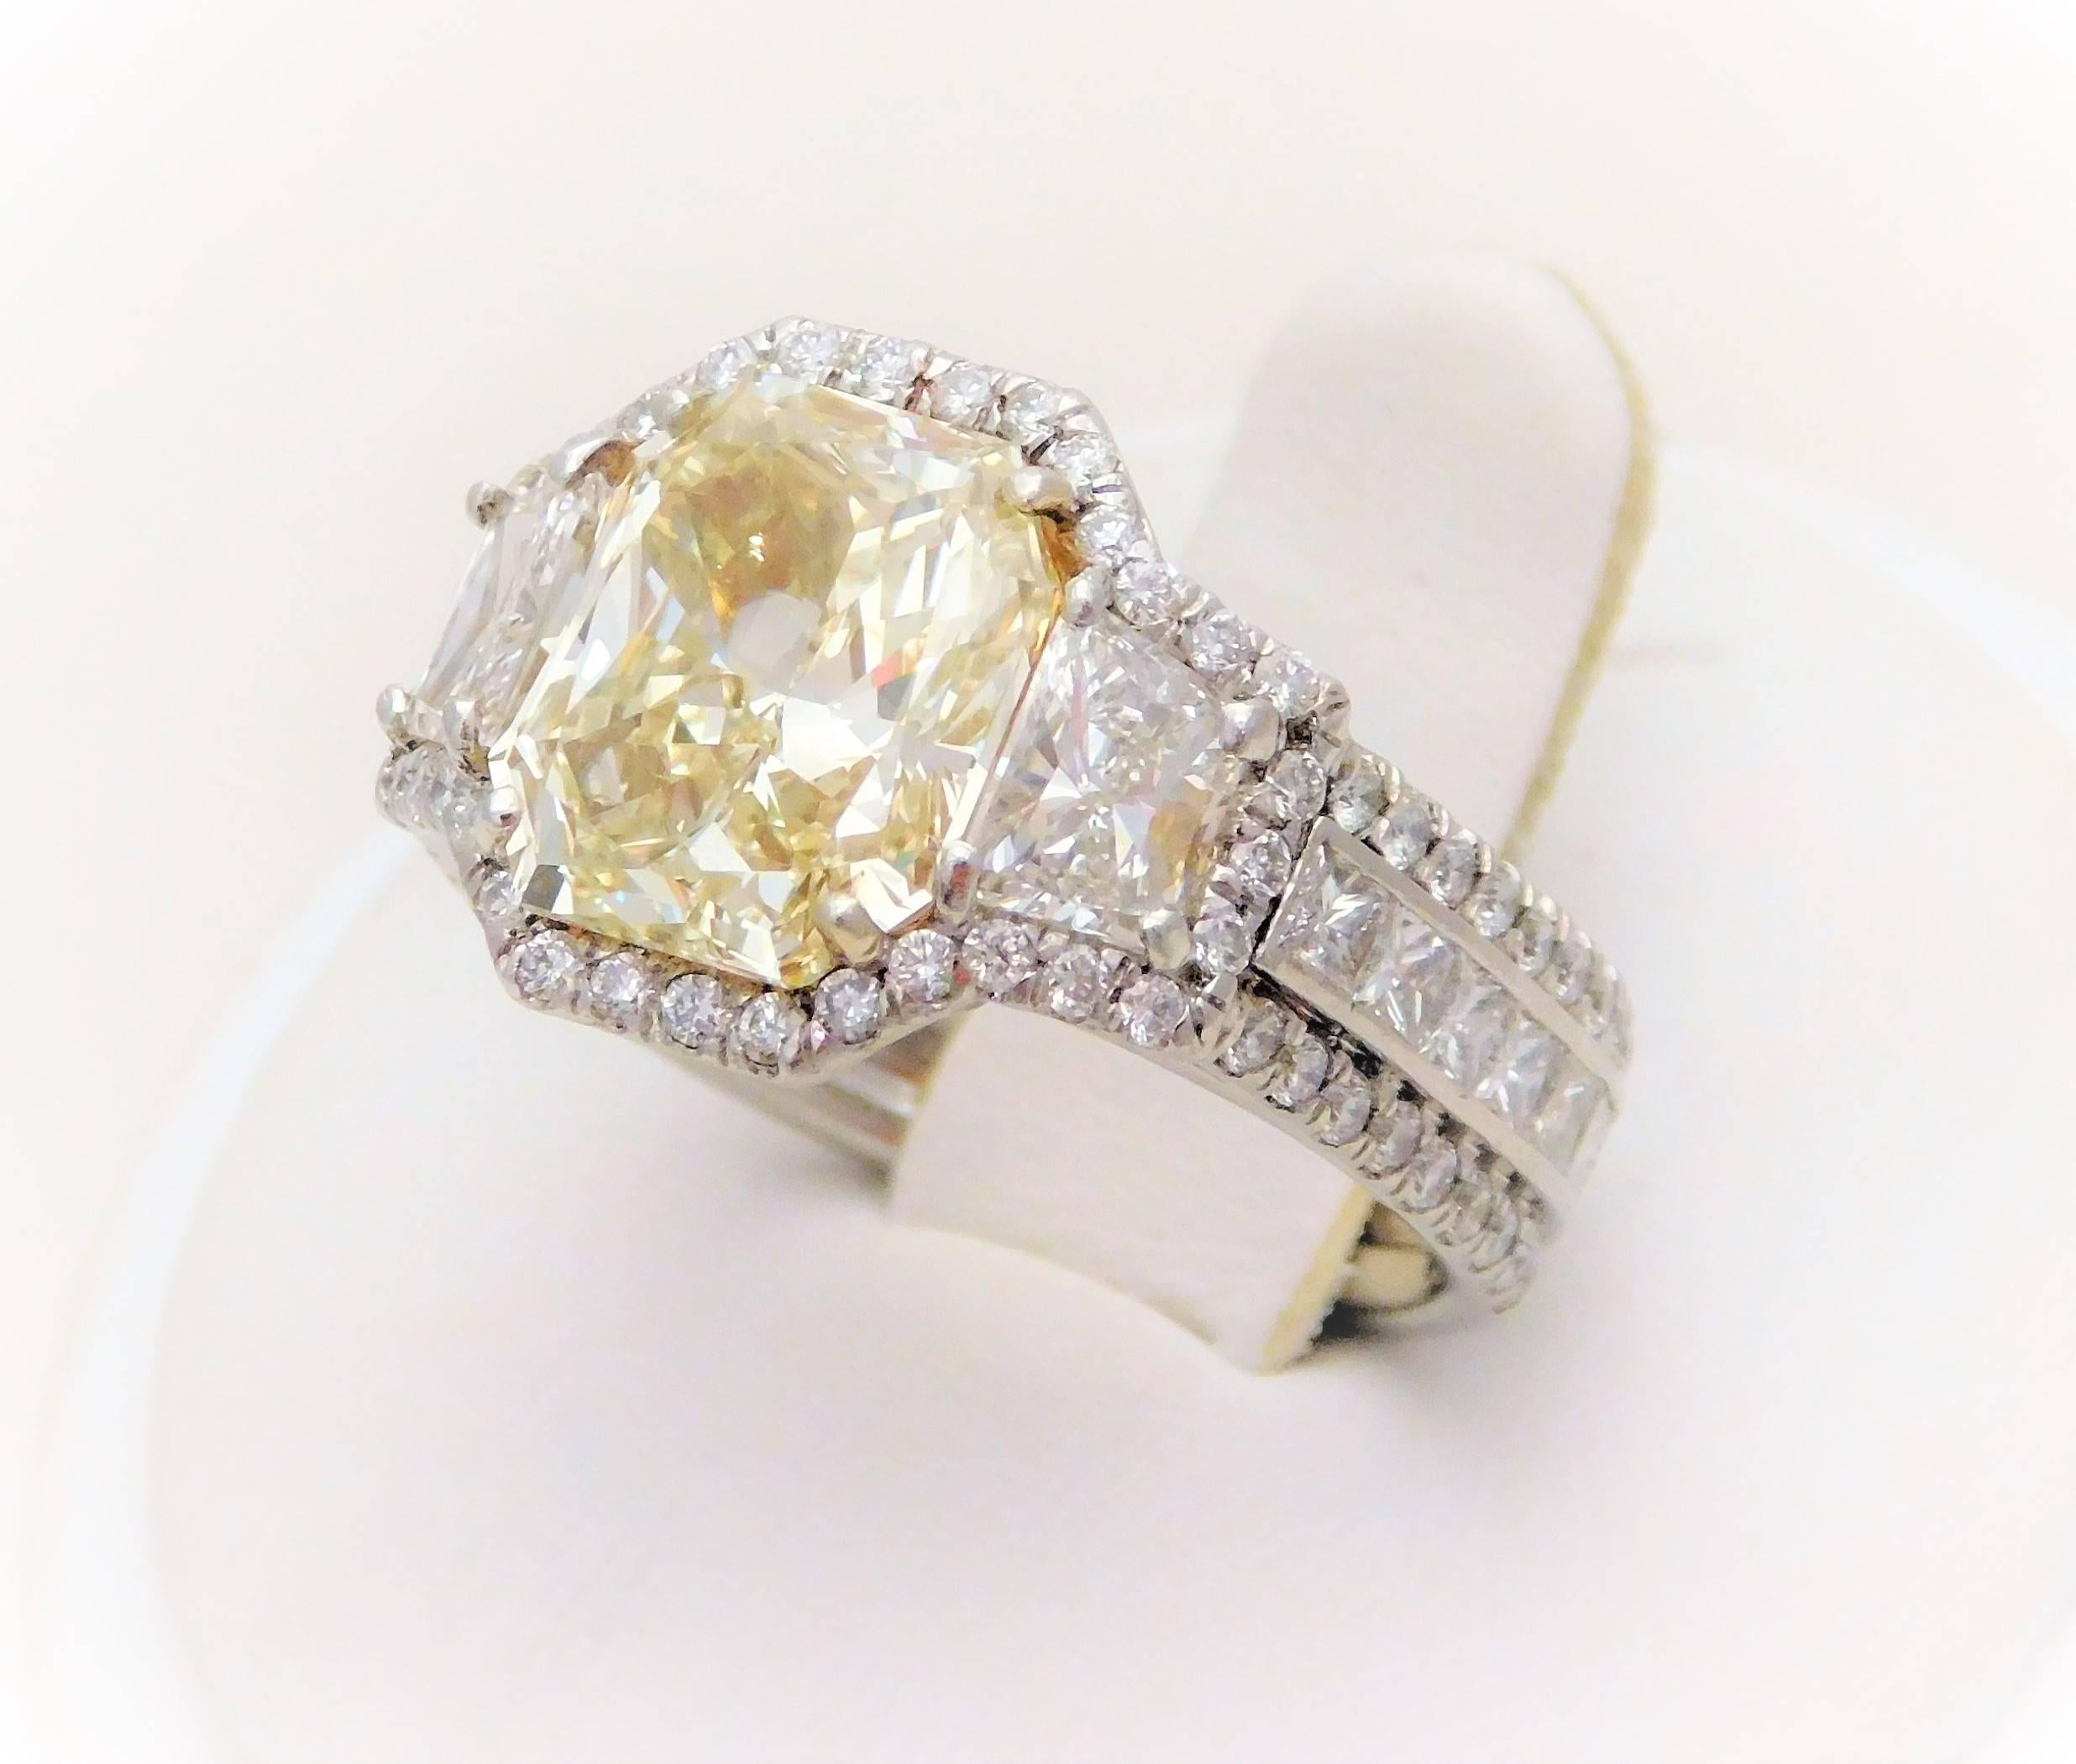 GIA Certified 7.57 Carat Handmade Radiant Cut Canary Yellow Diamond Ring For Sale 2